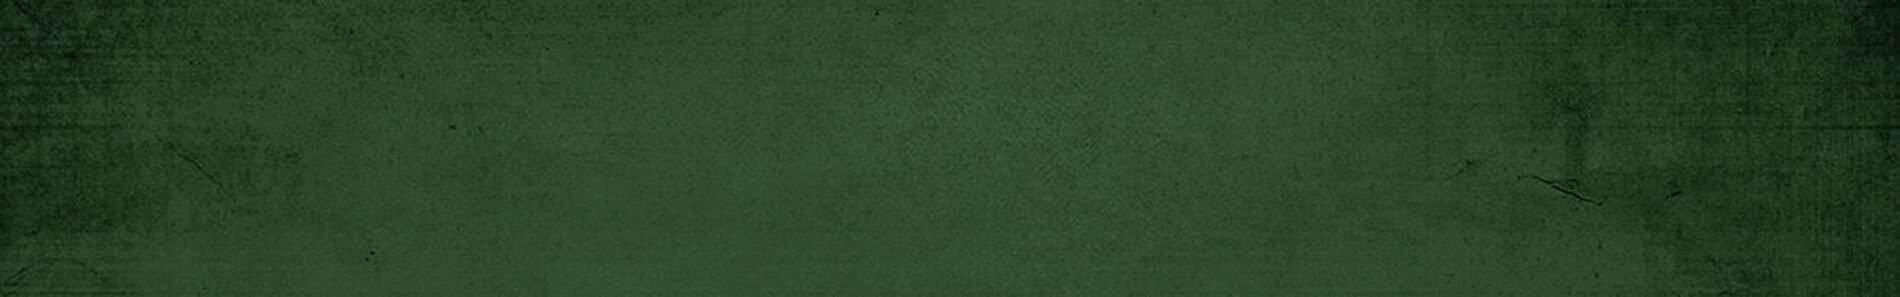 green background with dark gray edges